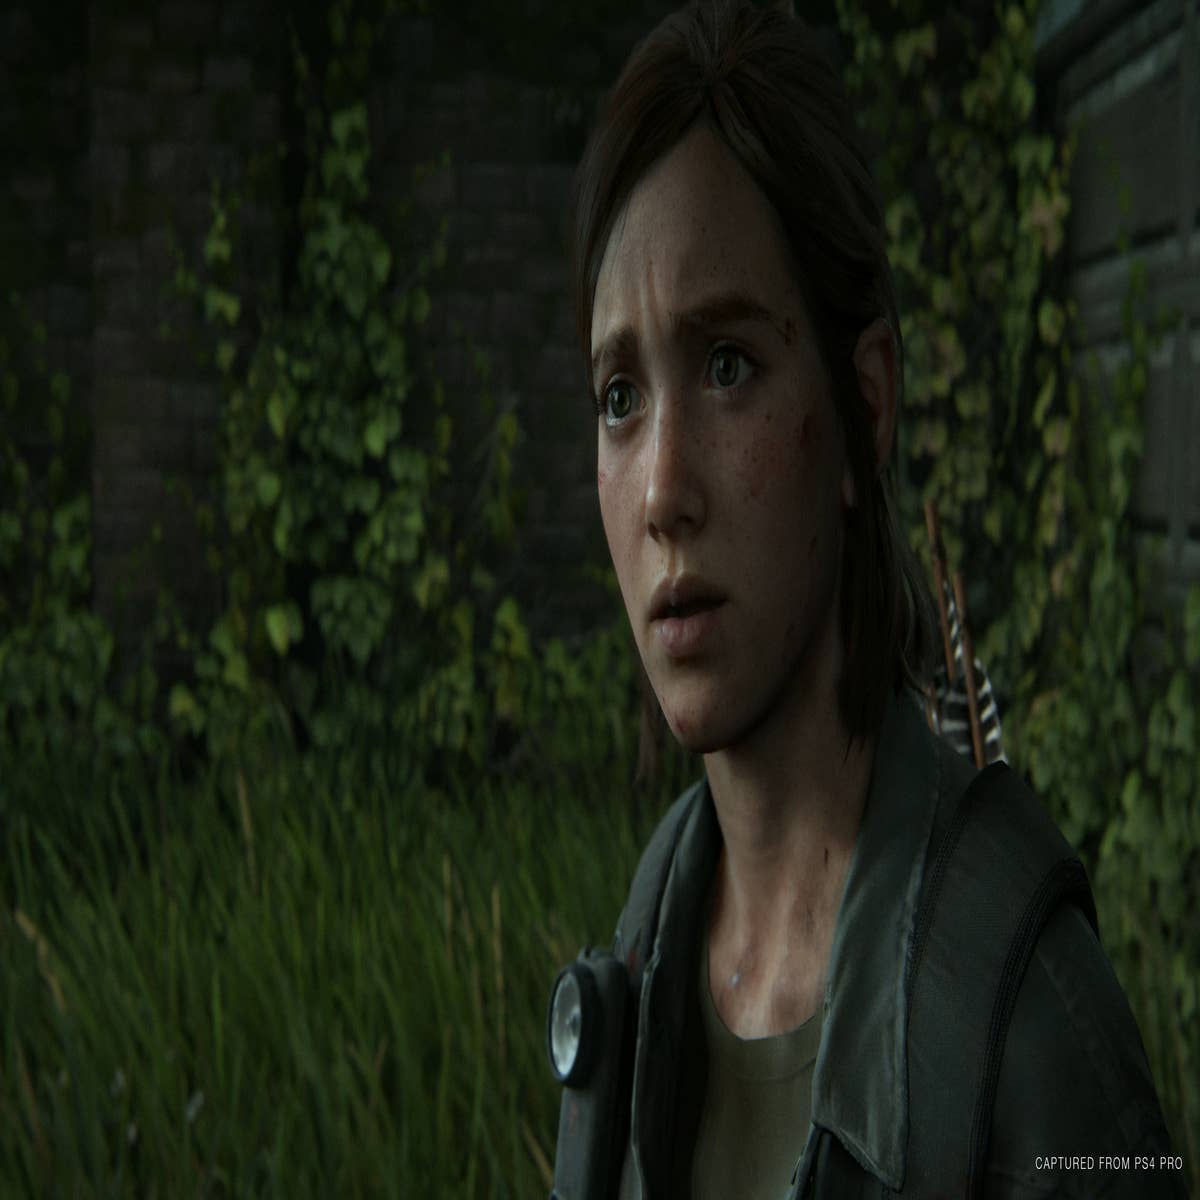 The Last of Us Part 1: What are the PC requirements?